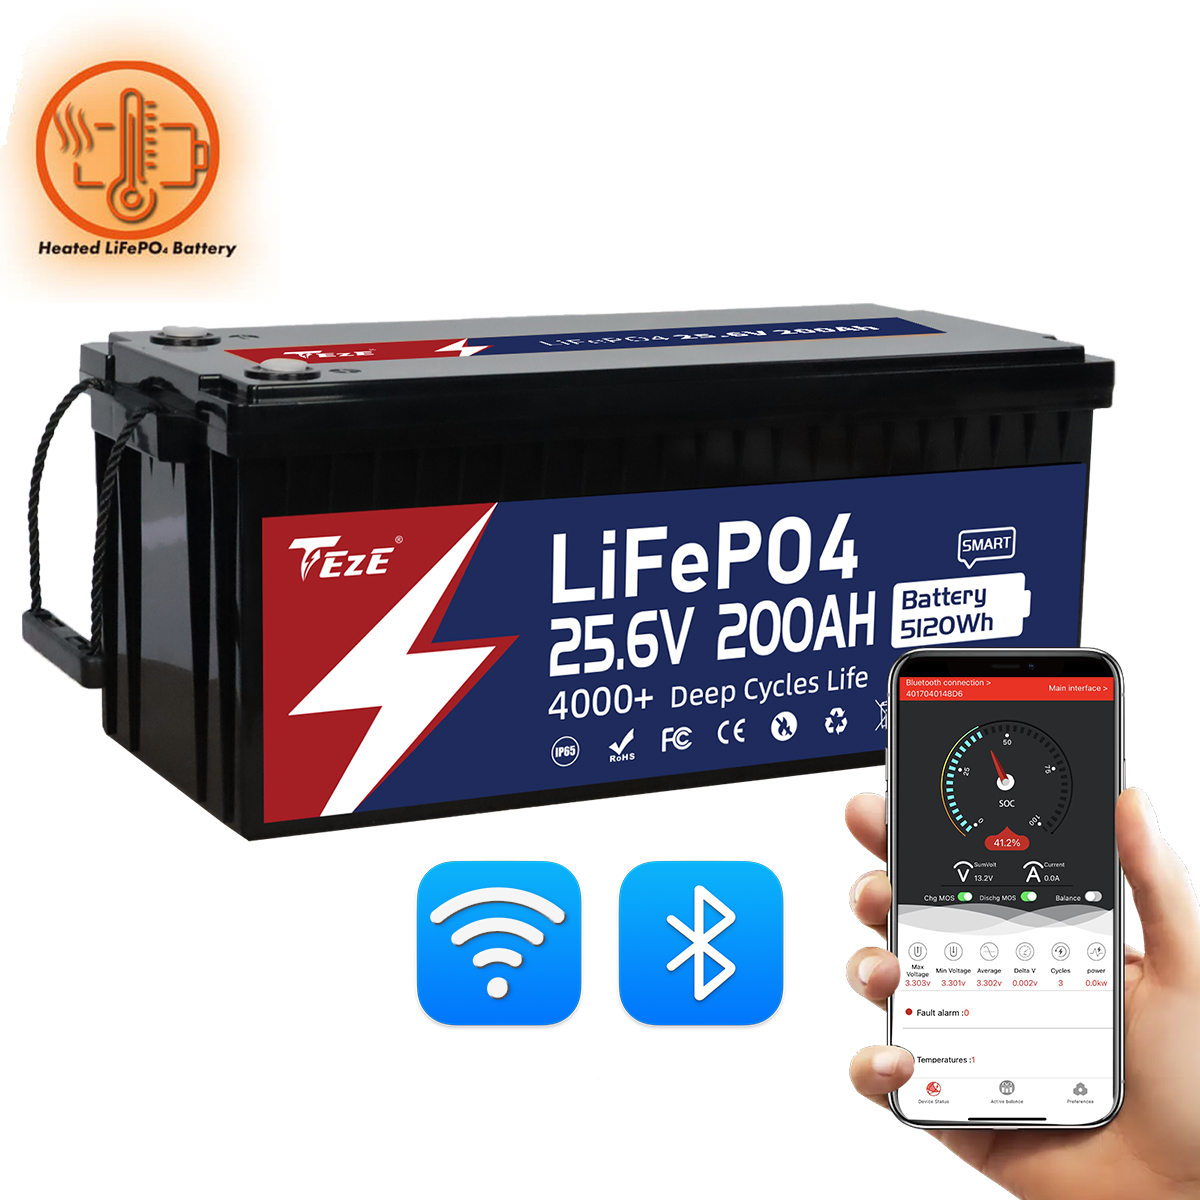 New Add WiFi-TezePower 24V 200Ah LiFePO4 Battery with WIFI and Bluetooth, Self-heating and Active Balancer, Built-in 200A Daly BMS(WIFI Built-in Version)